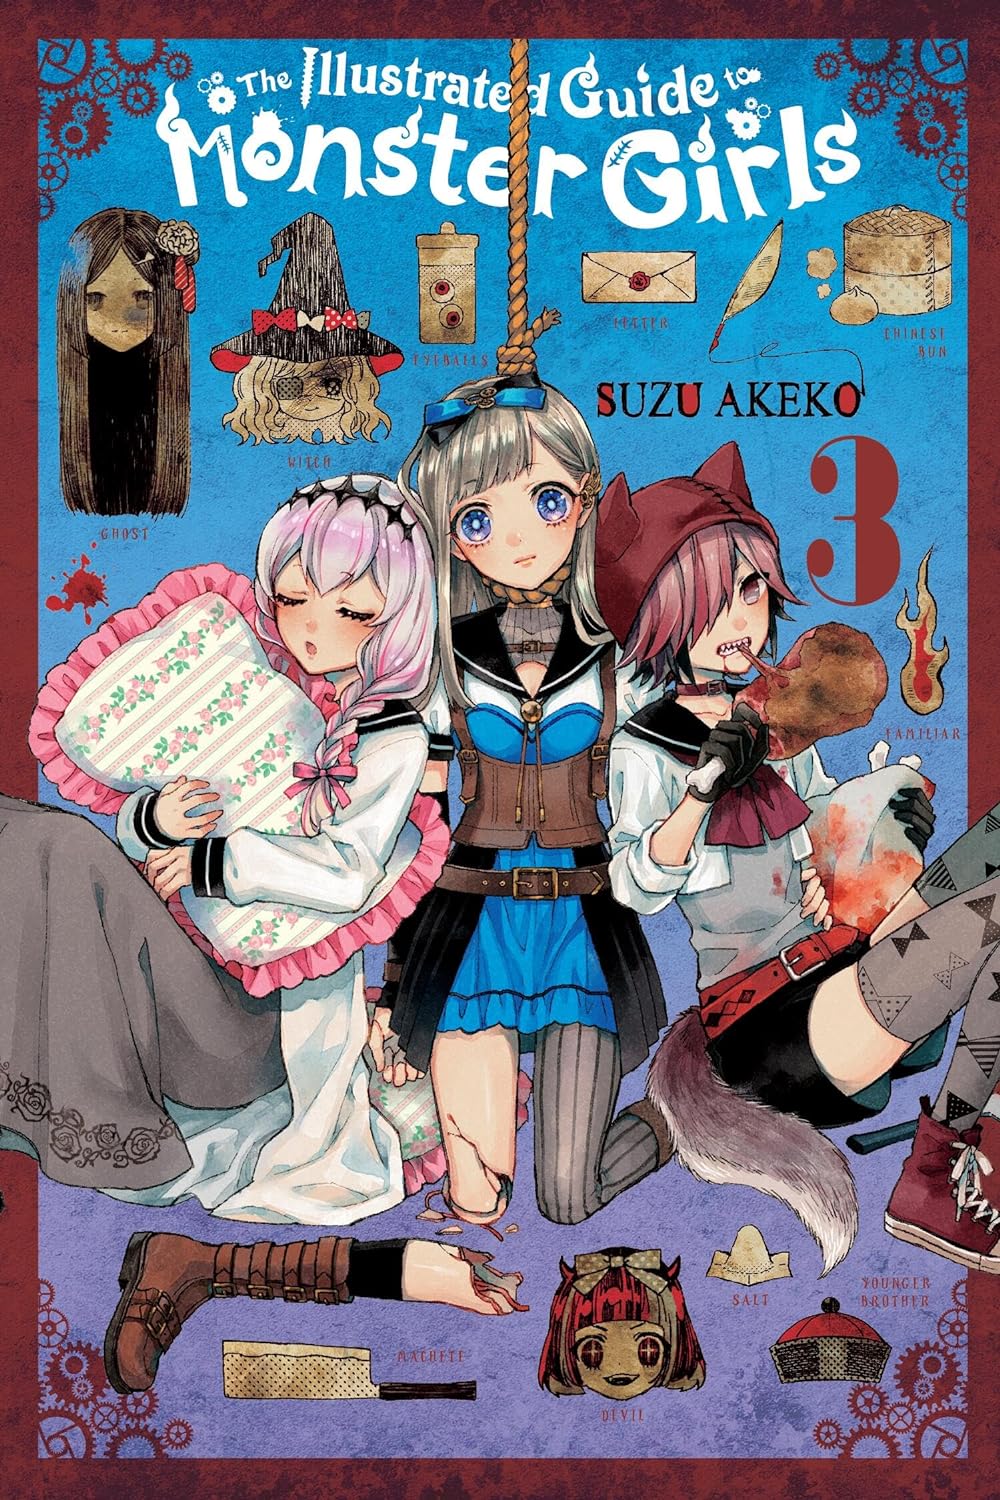 The Illustrated Guide to Monster Girls Vol. 03